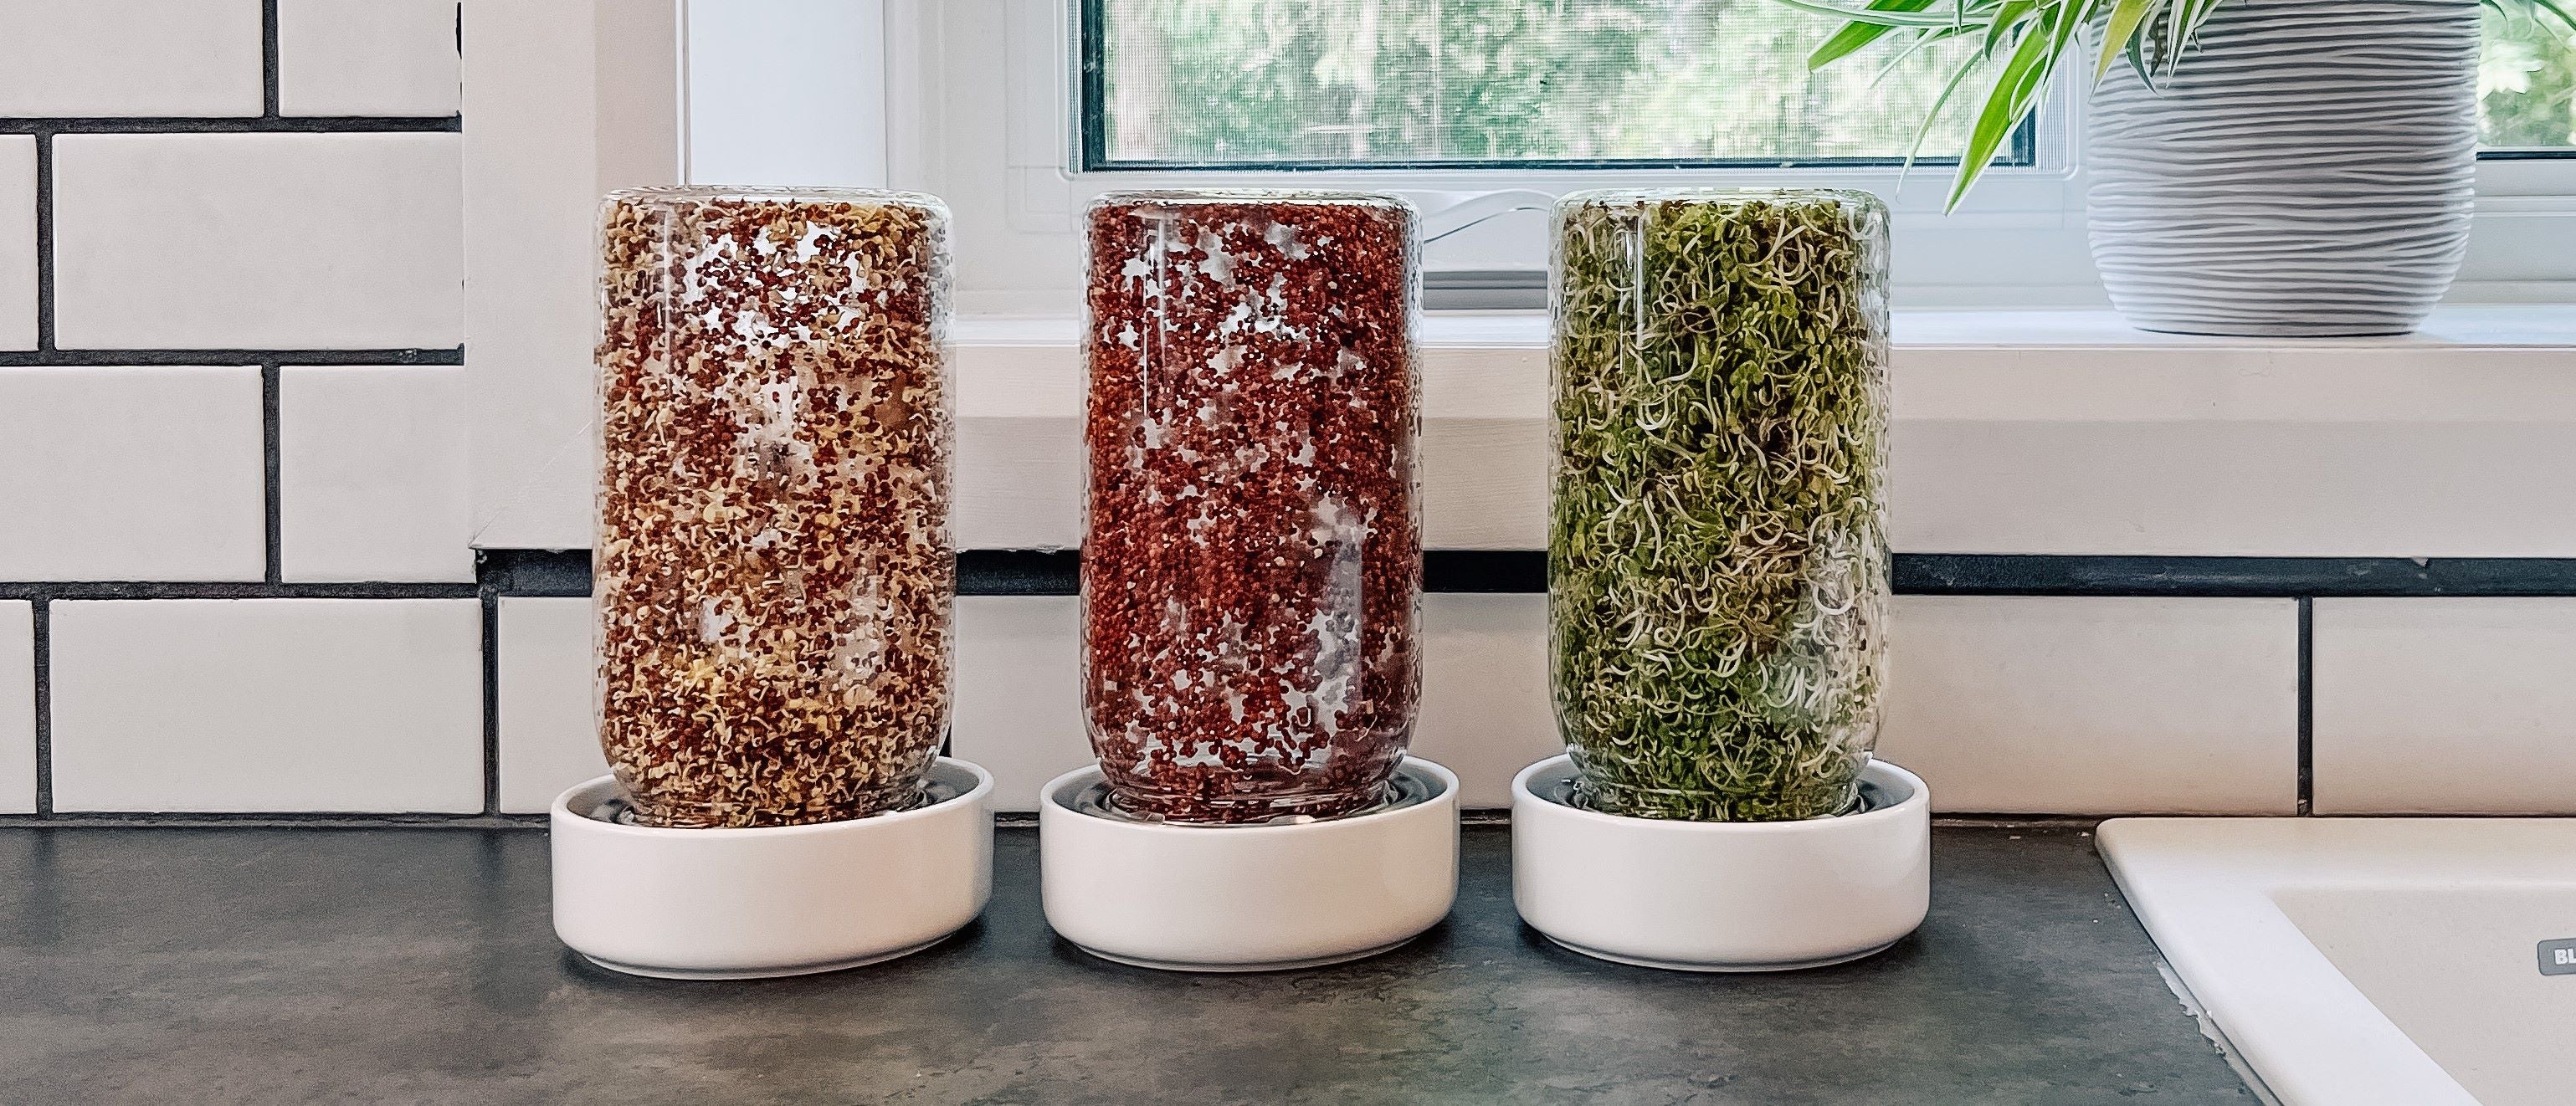 Three Sprout Jar Kits on a kitchen counter with broccoli sprouts at different stages of growth